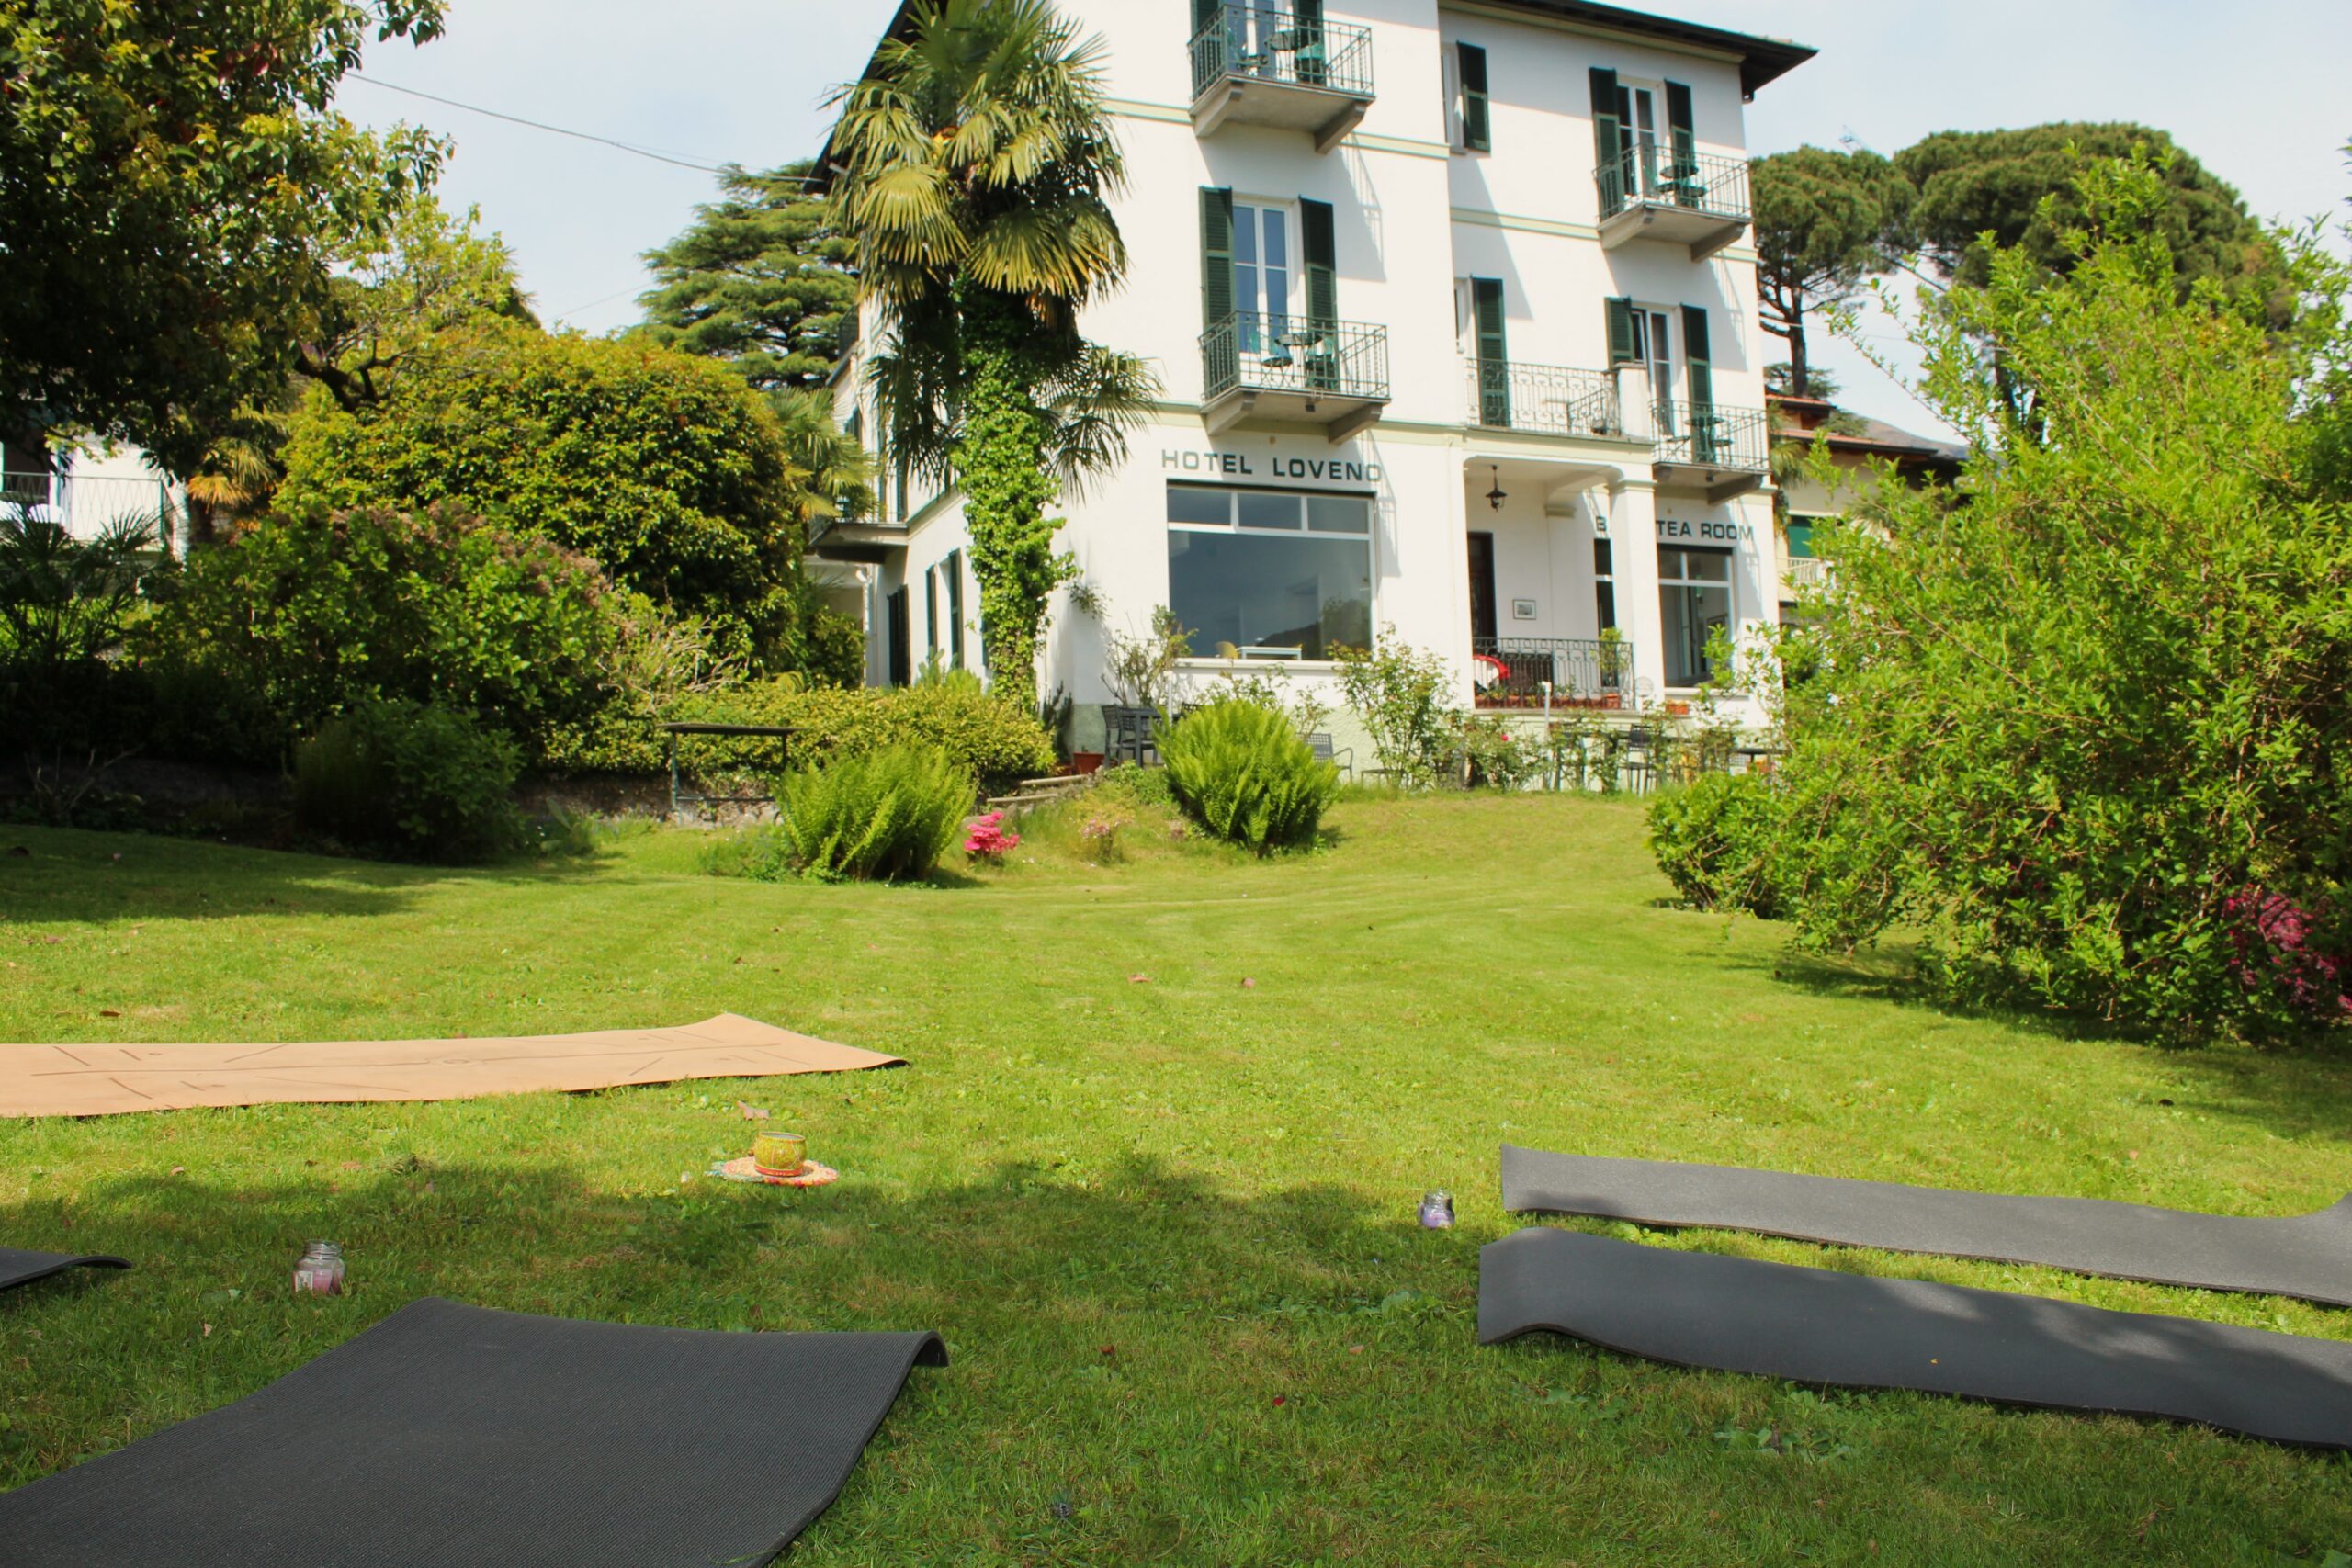 yoga mat and hotel building